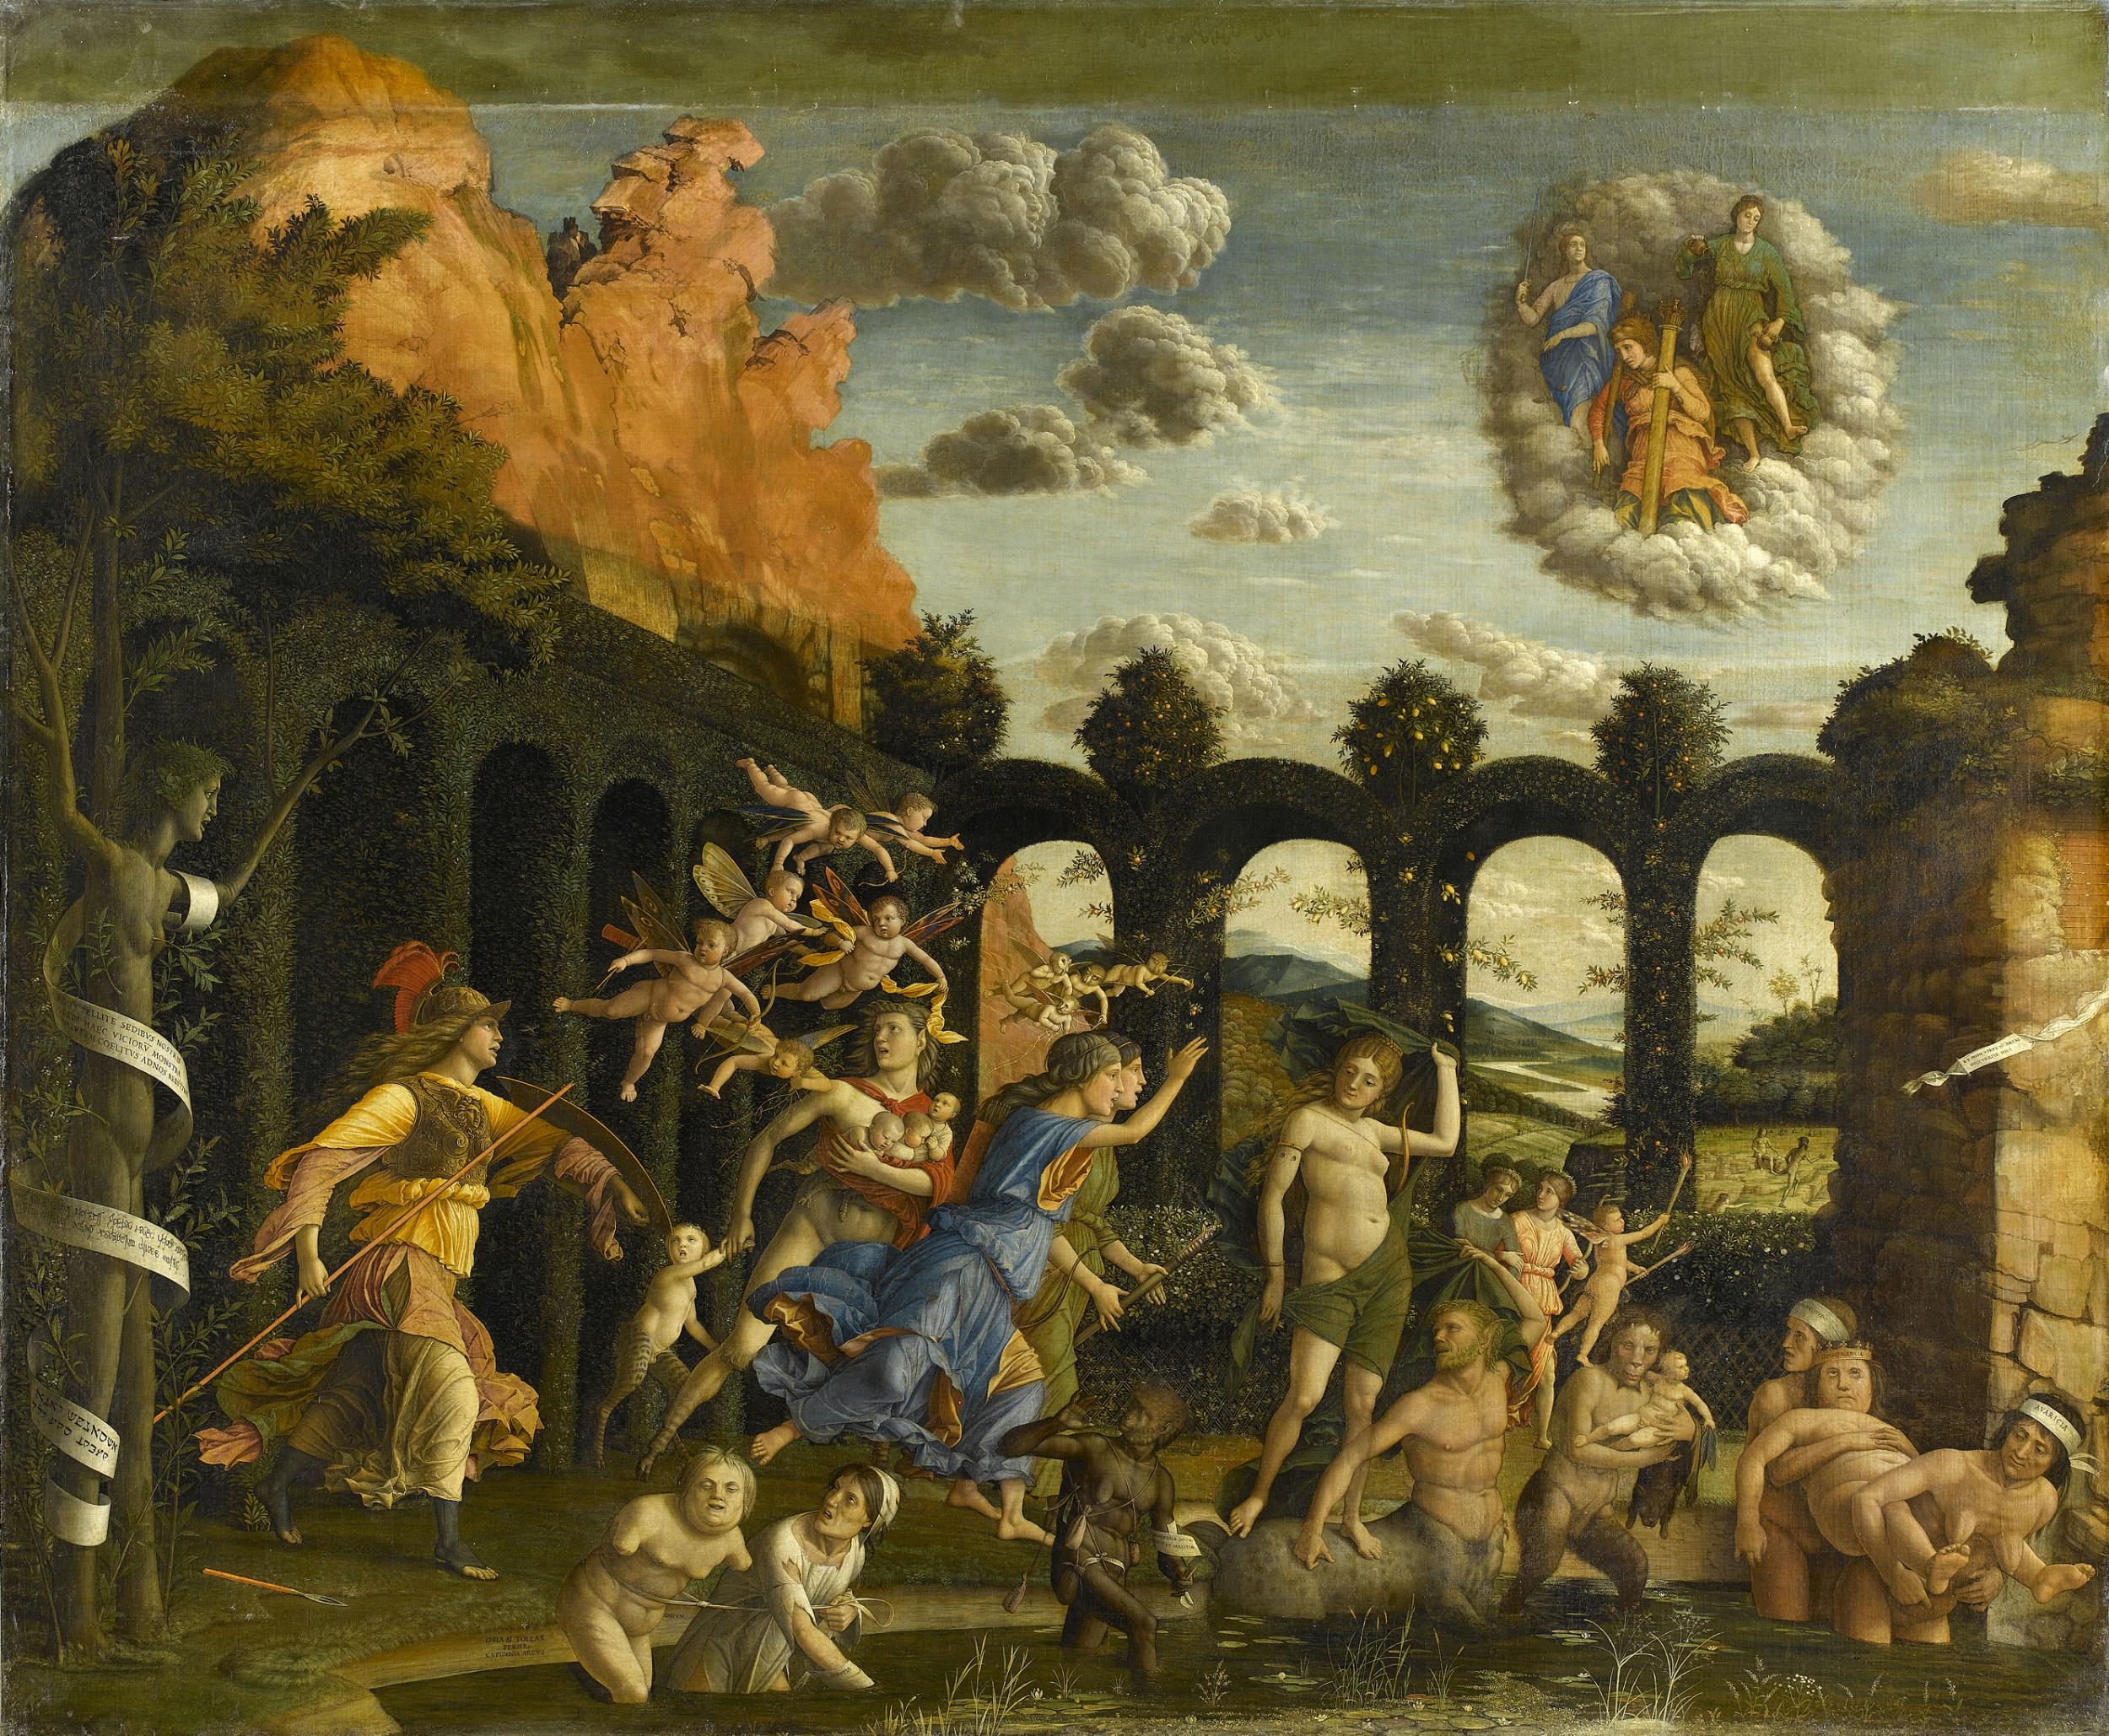 Mantegna’s ‘Minerva expelling the Vices from the Garden of Virtue’, about 1500-1502 (RMN-Grand Palais/Musée du Louvre/Gérard Blot)